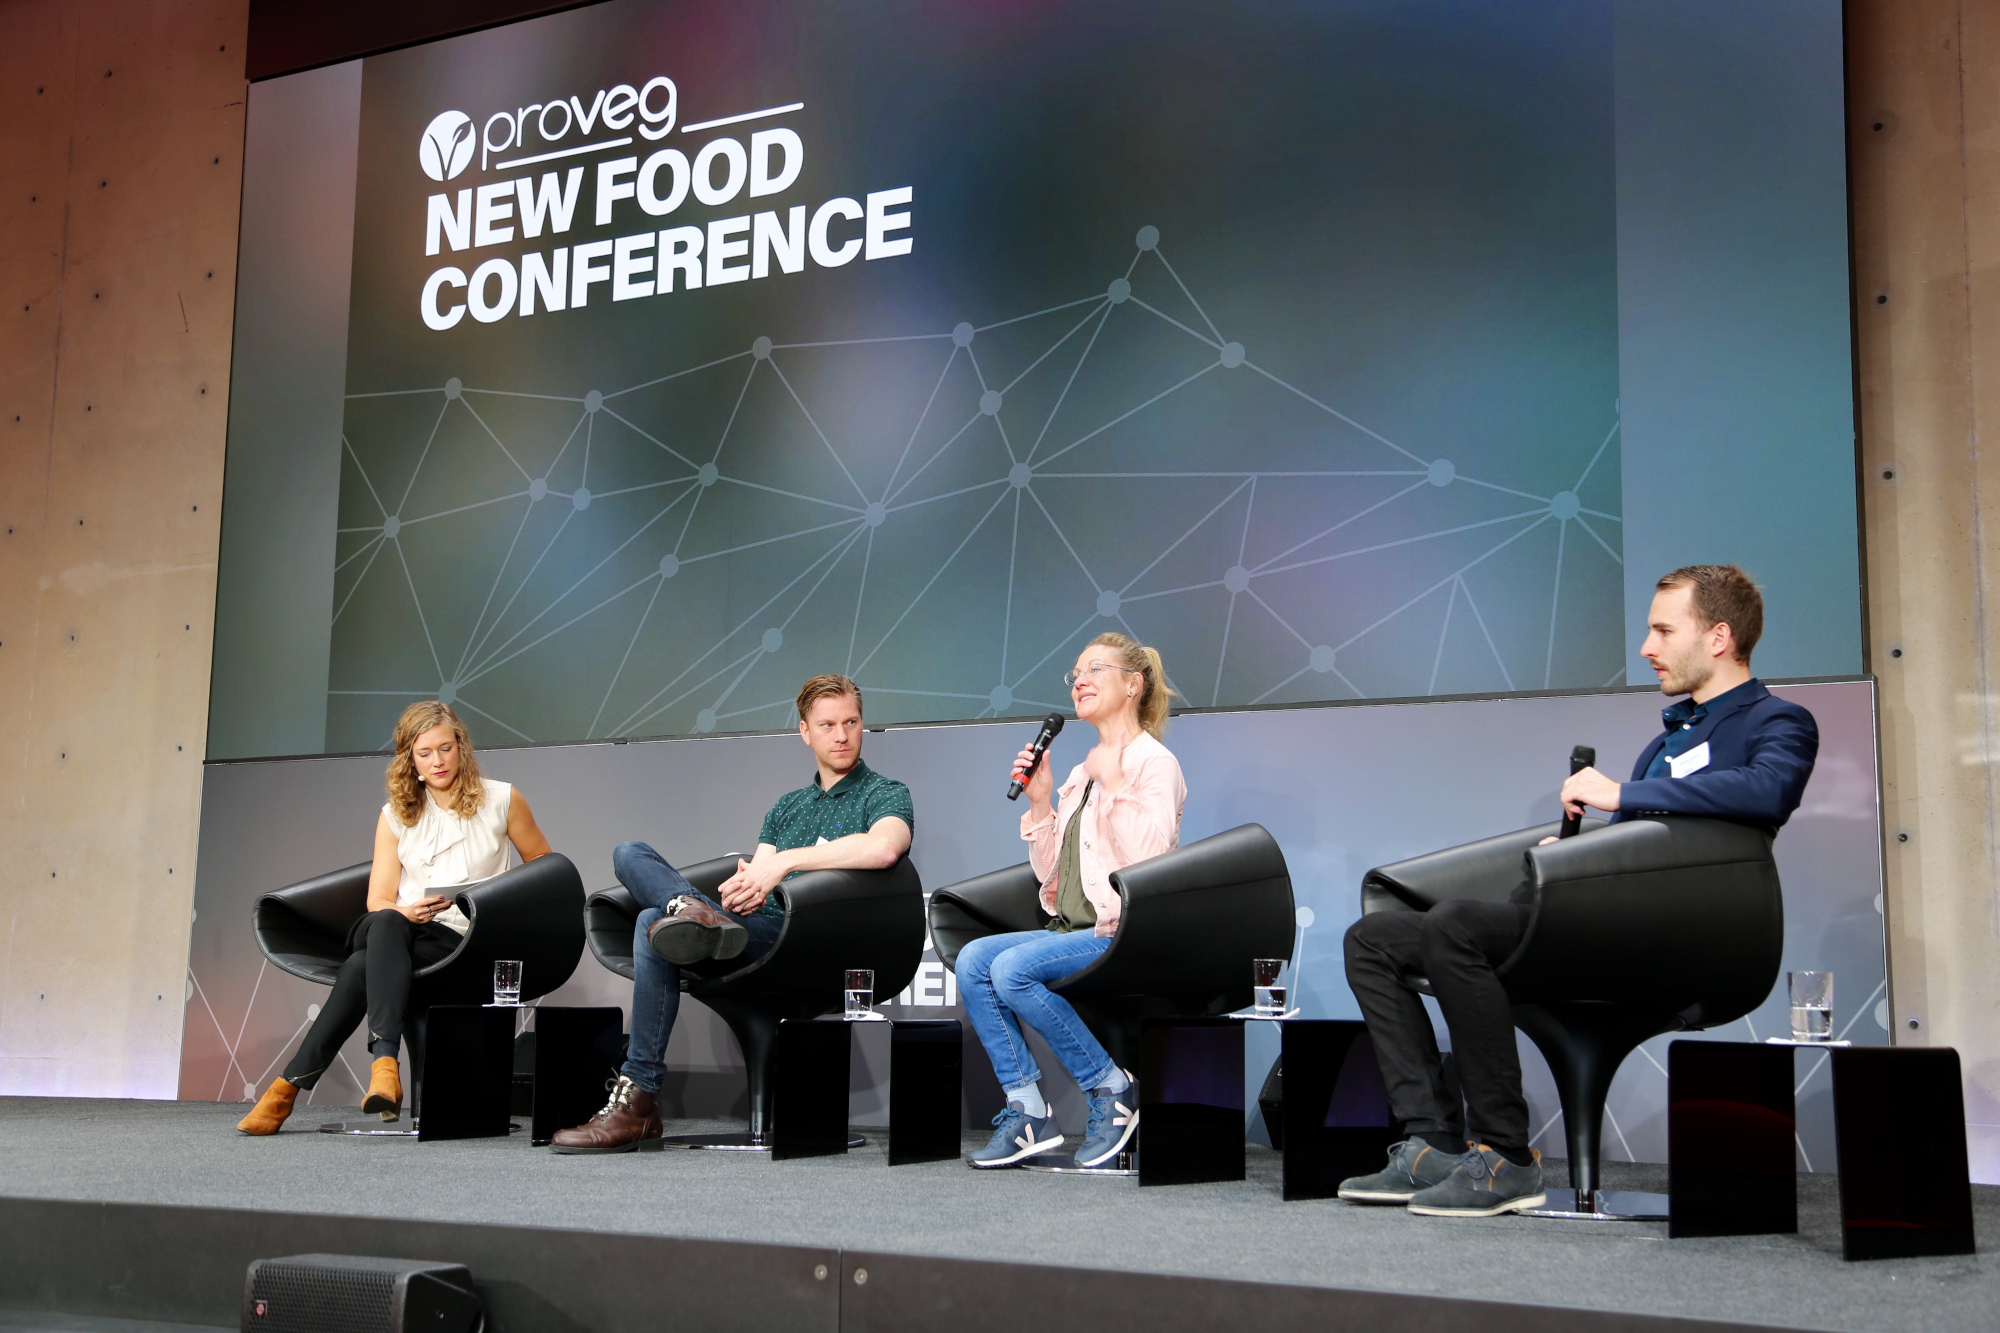 New Food Conference stage